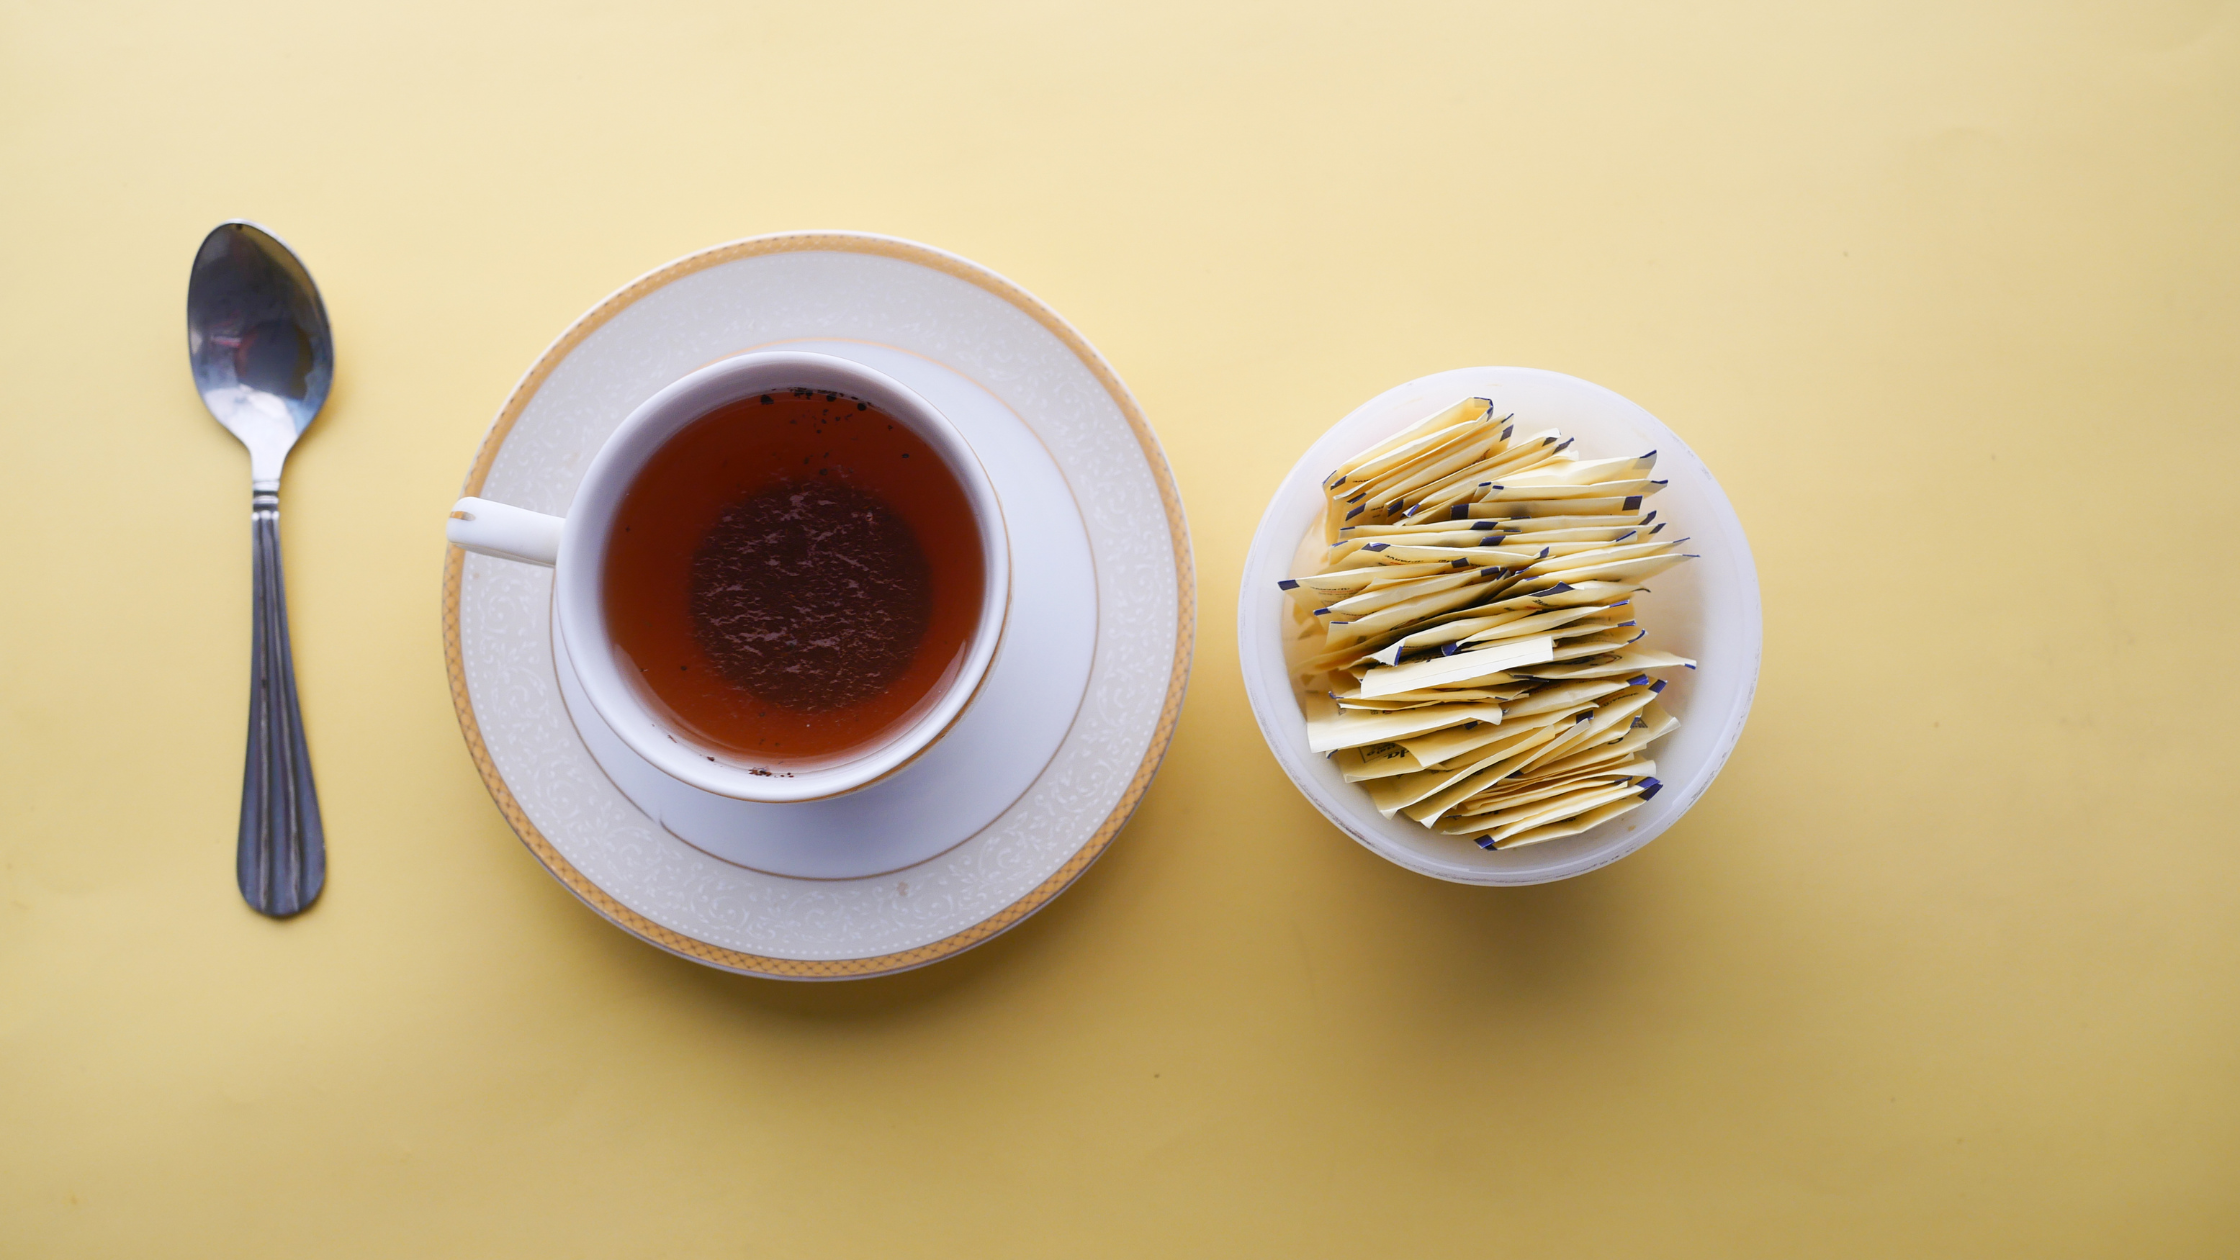 cup of black tea beside a dish full of sweetener packets